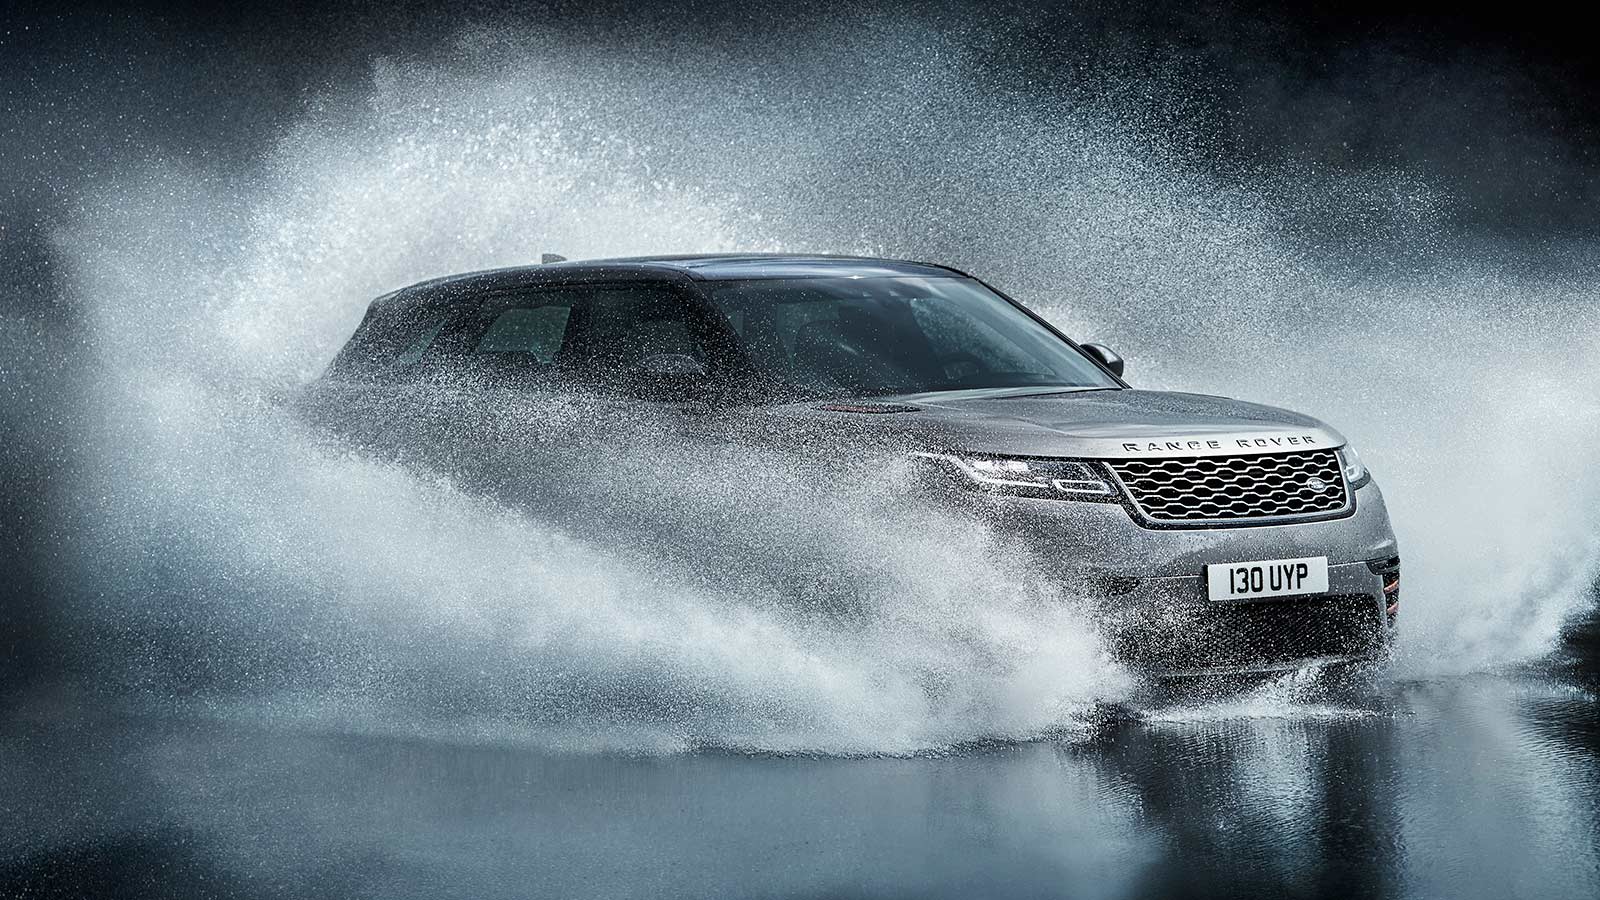 Range Rover Velar seeks to offer a confident drive while being a luxurious SUV for occupants.